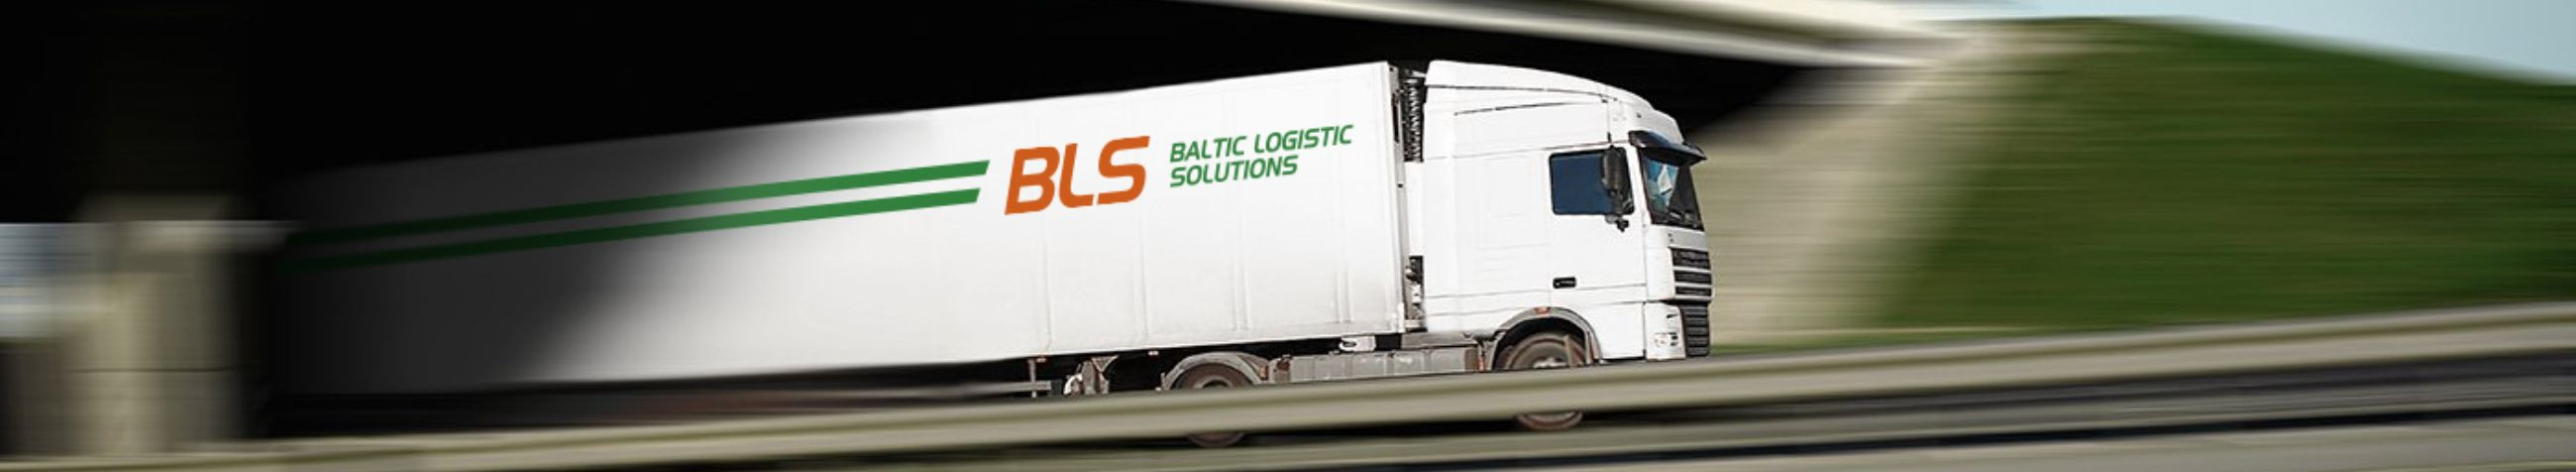 We offer comprehensive logistics solutions including freight transport, warehousing, and product labelling.